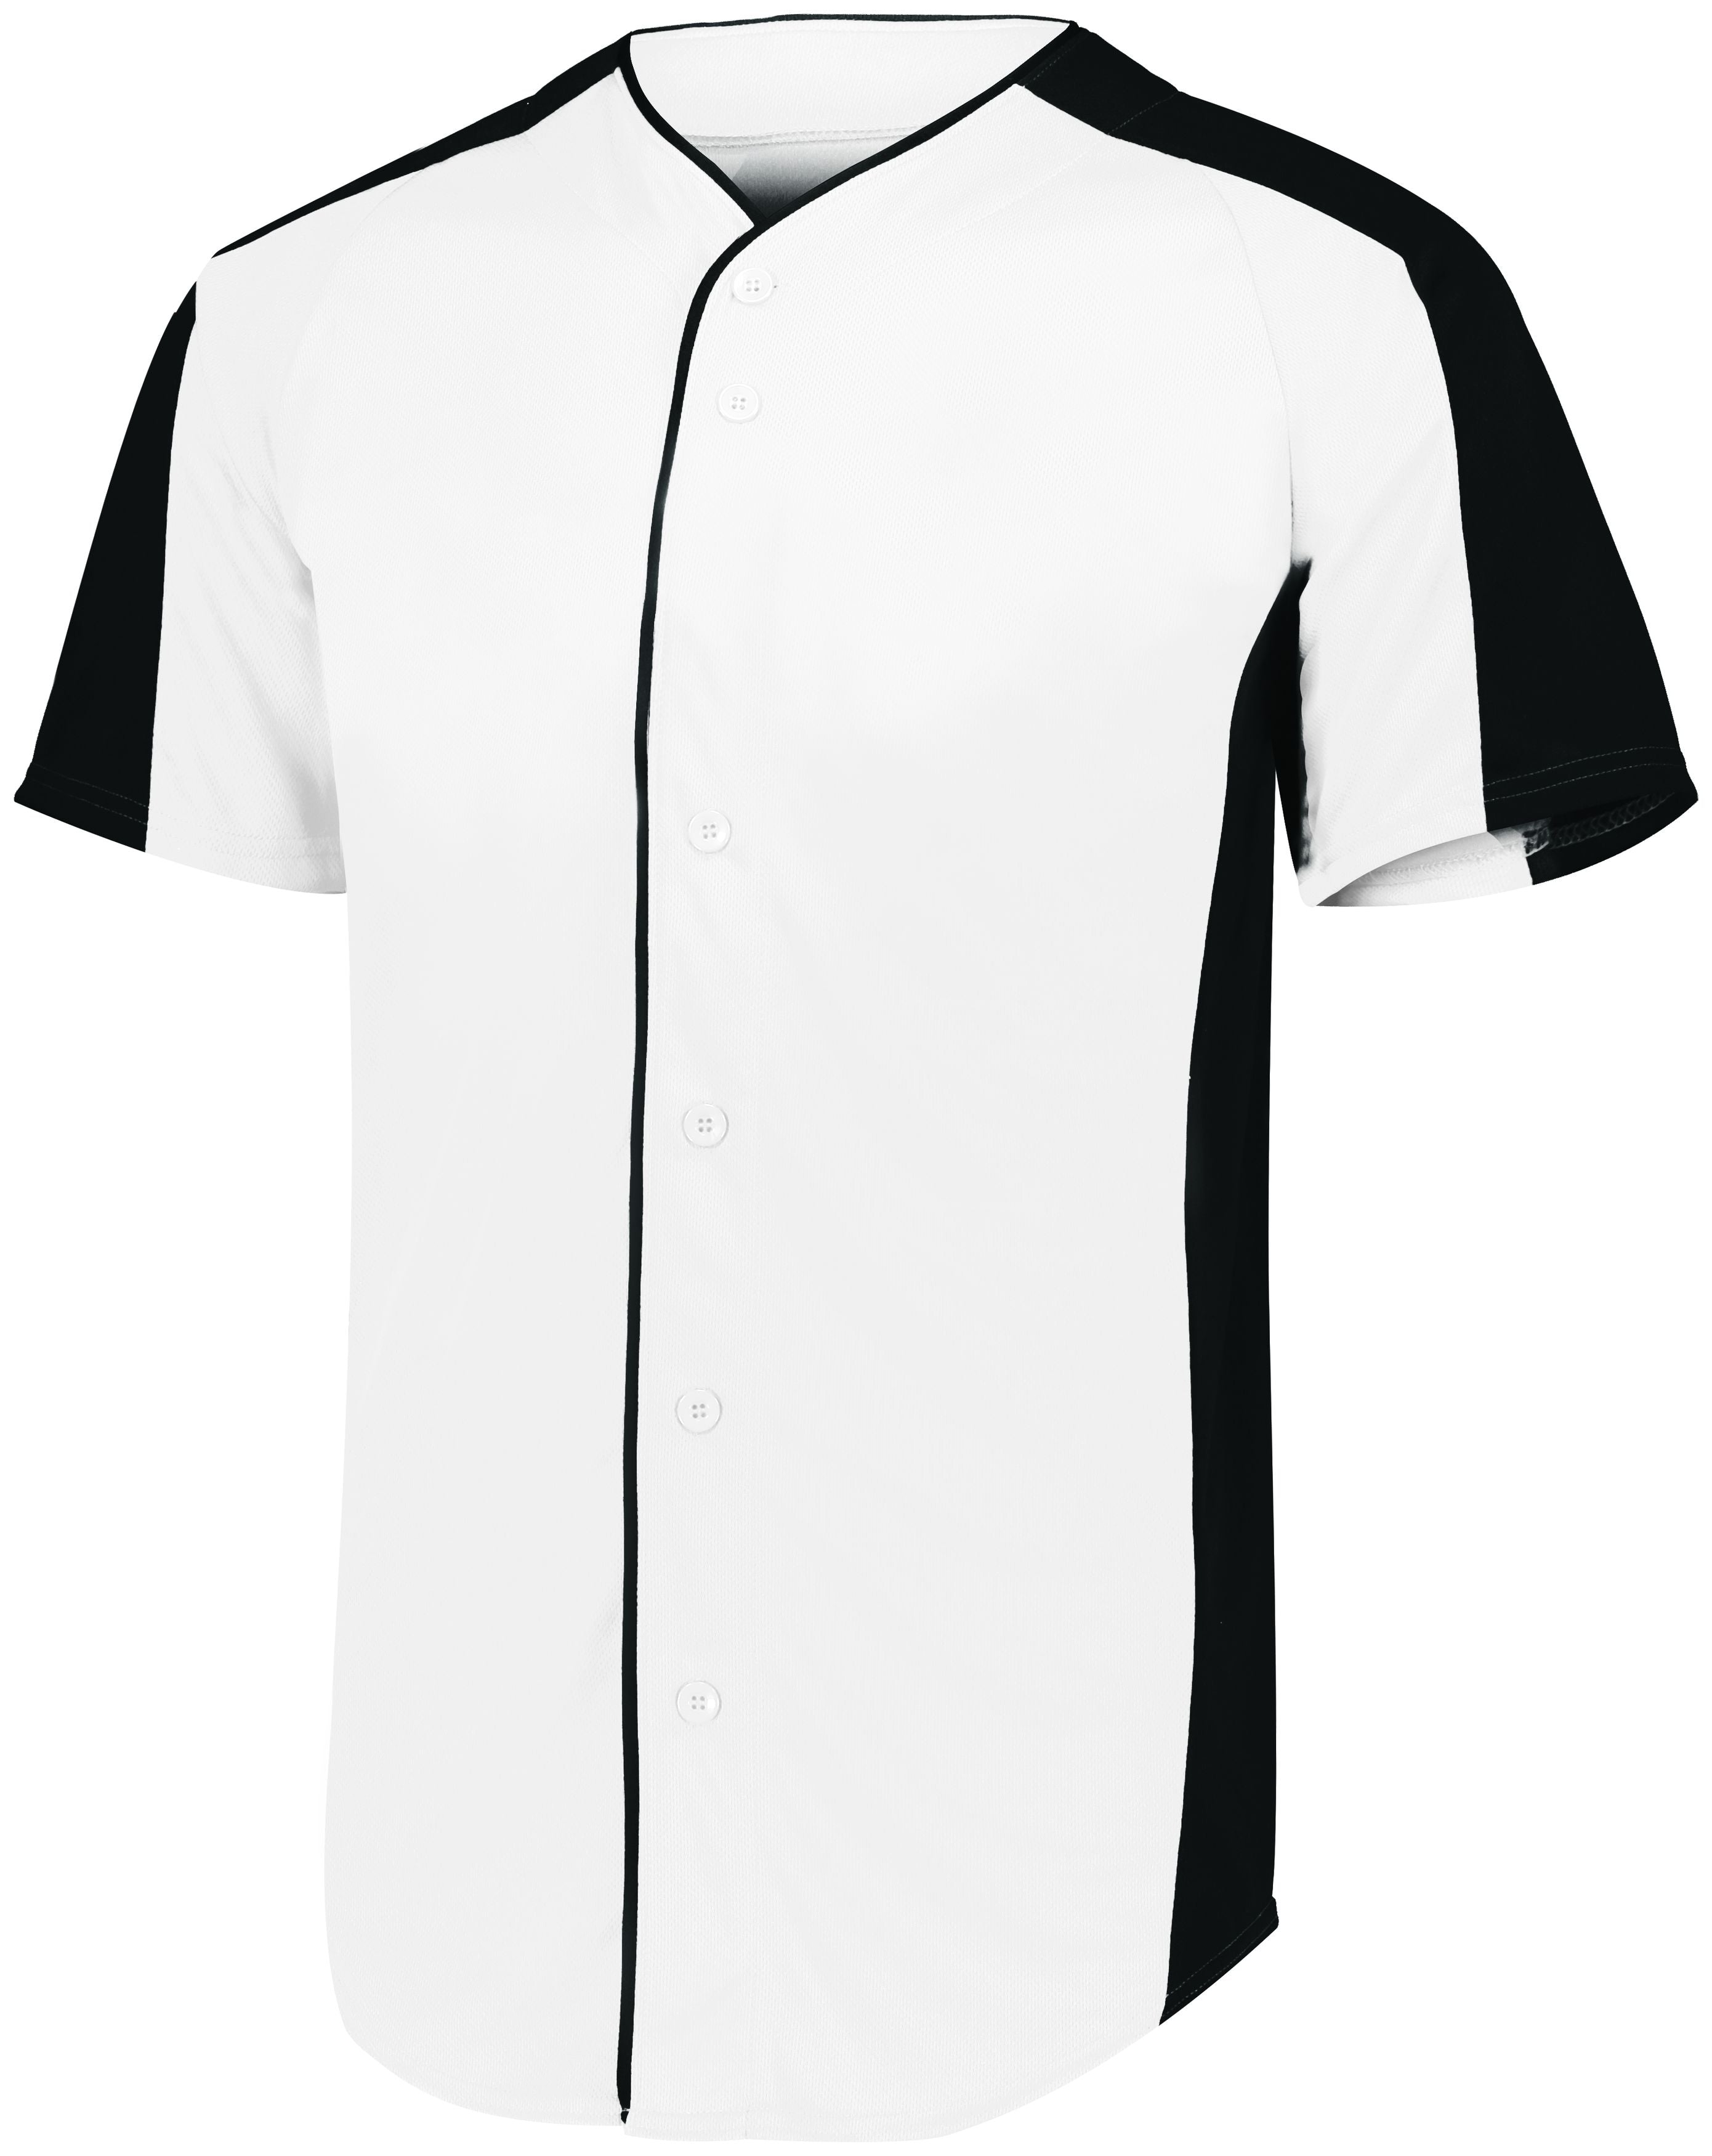 Augusta Sportswear Youth Full-Button Baseball Jersey in White/Black  -Part of the Youth, Youth-Jersey, Augusta-Products, Baseball, Shirts, All-Sports, All-Sports-1 product lines at KanaleyCreations.com